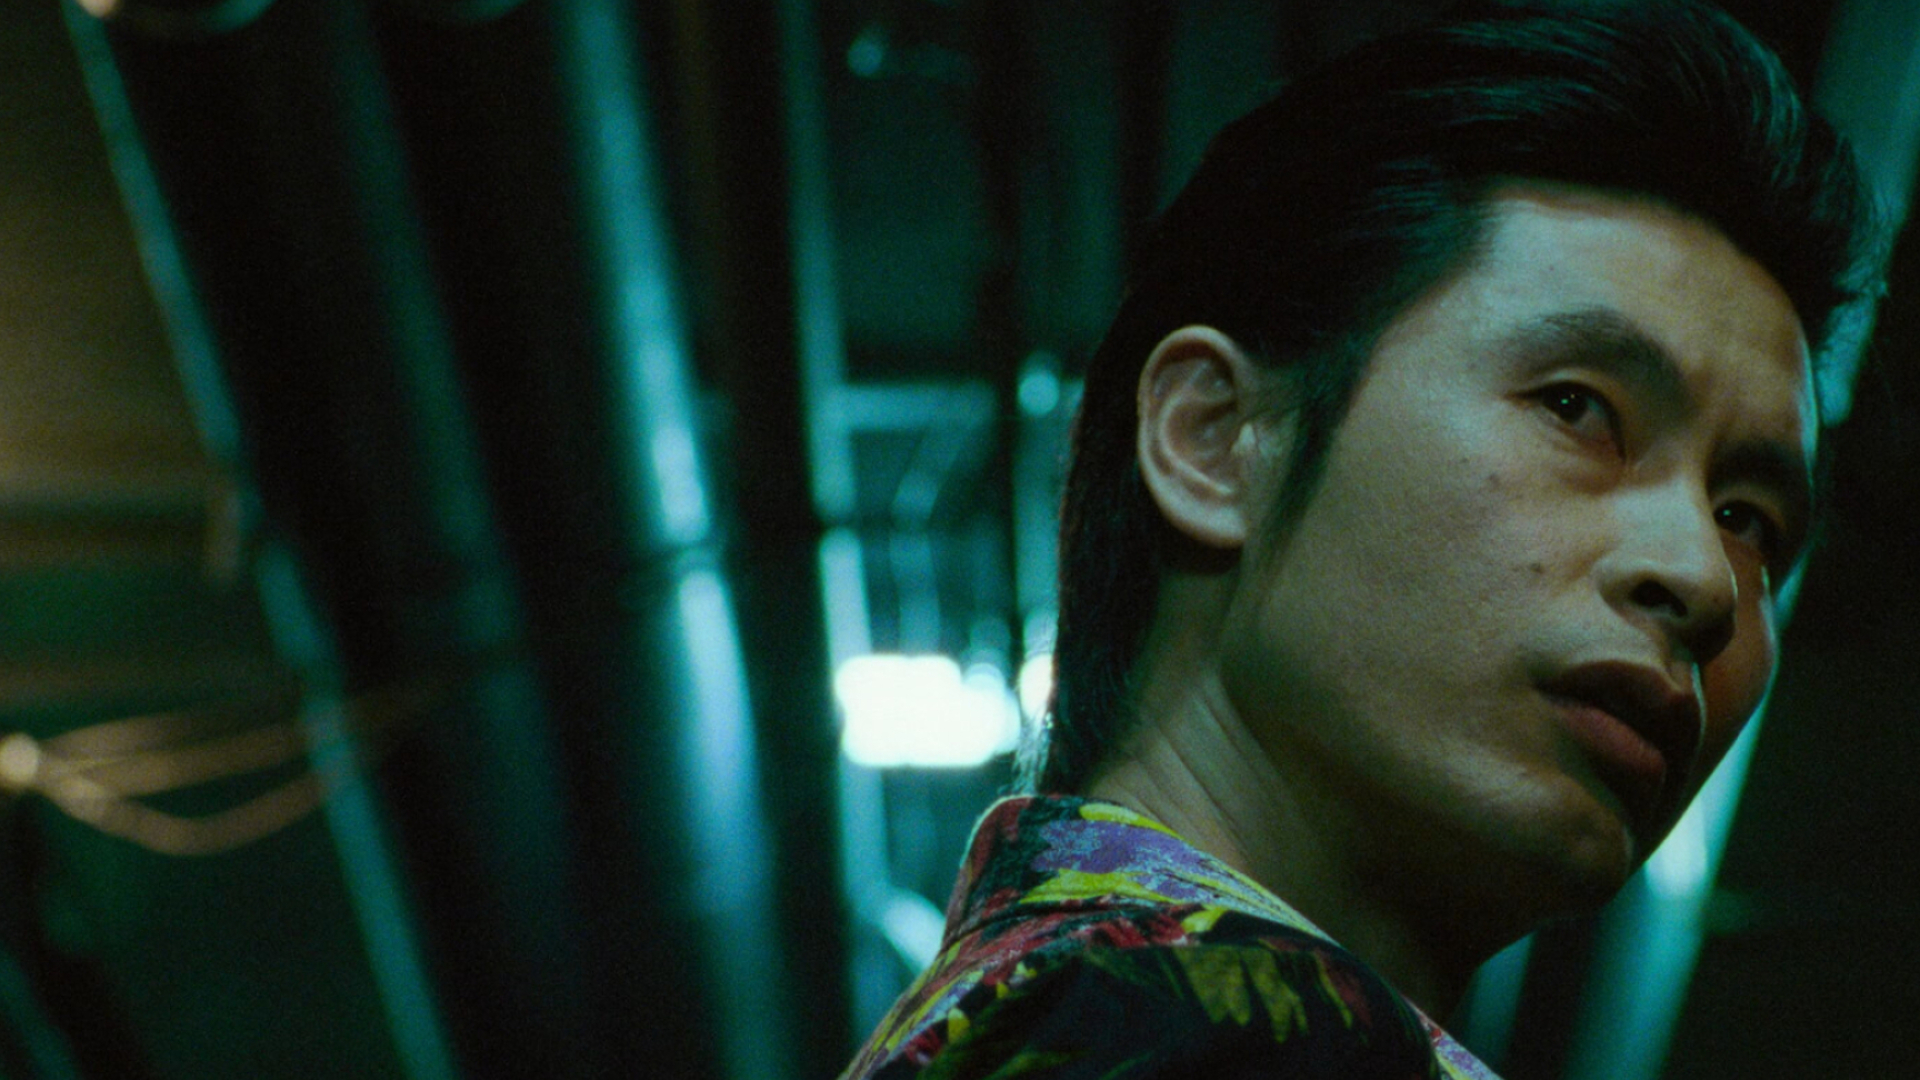 Oldboy: The film won the Grand Prix at the 2004 Cannes Film Festival. 1920x1080 Full HD Background.